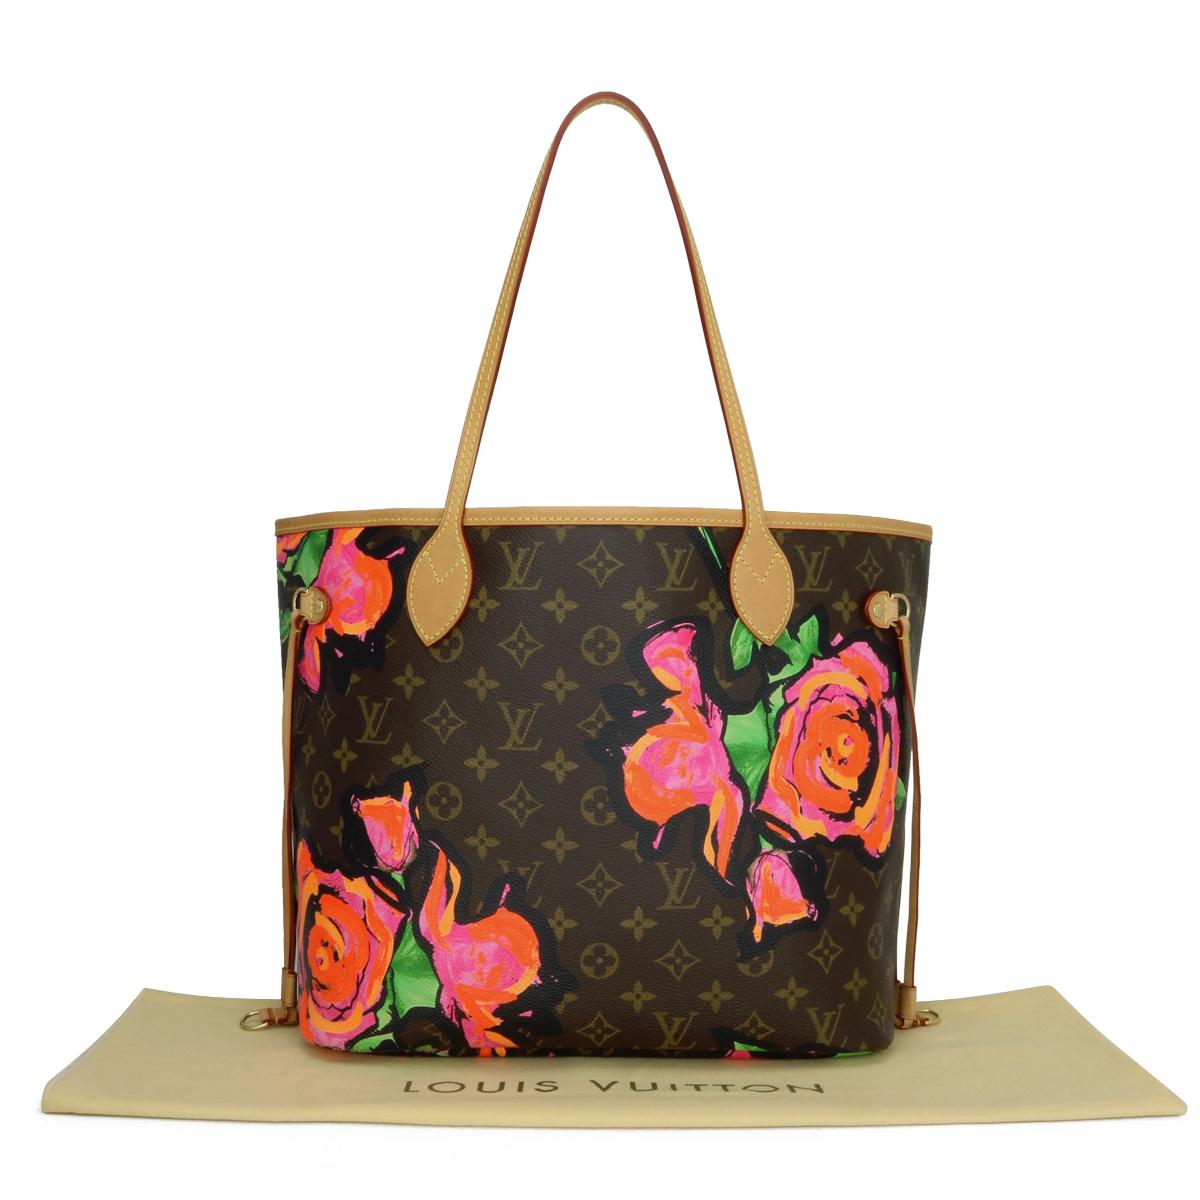 Louis Vuitton x Stephen Sprouse Neverfull MM Bag in Monogram Roses with Pink Interior with Gold Hardware 2009 Limited Edition.

This bag is in very good condition.

Finding this particular style bag in excellent condition becomes extremely difficult